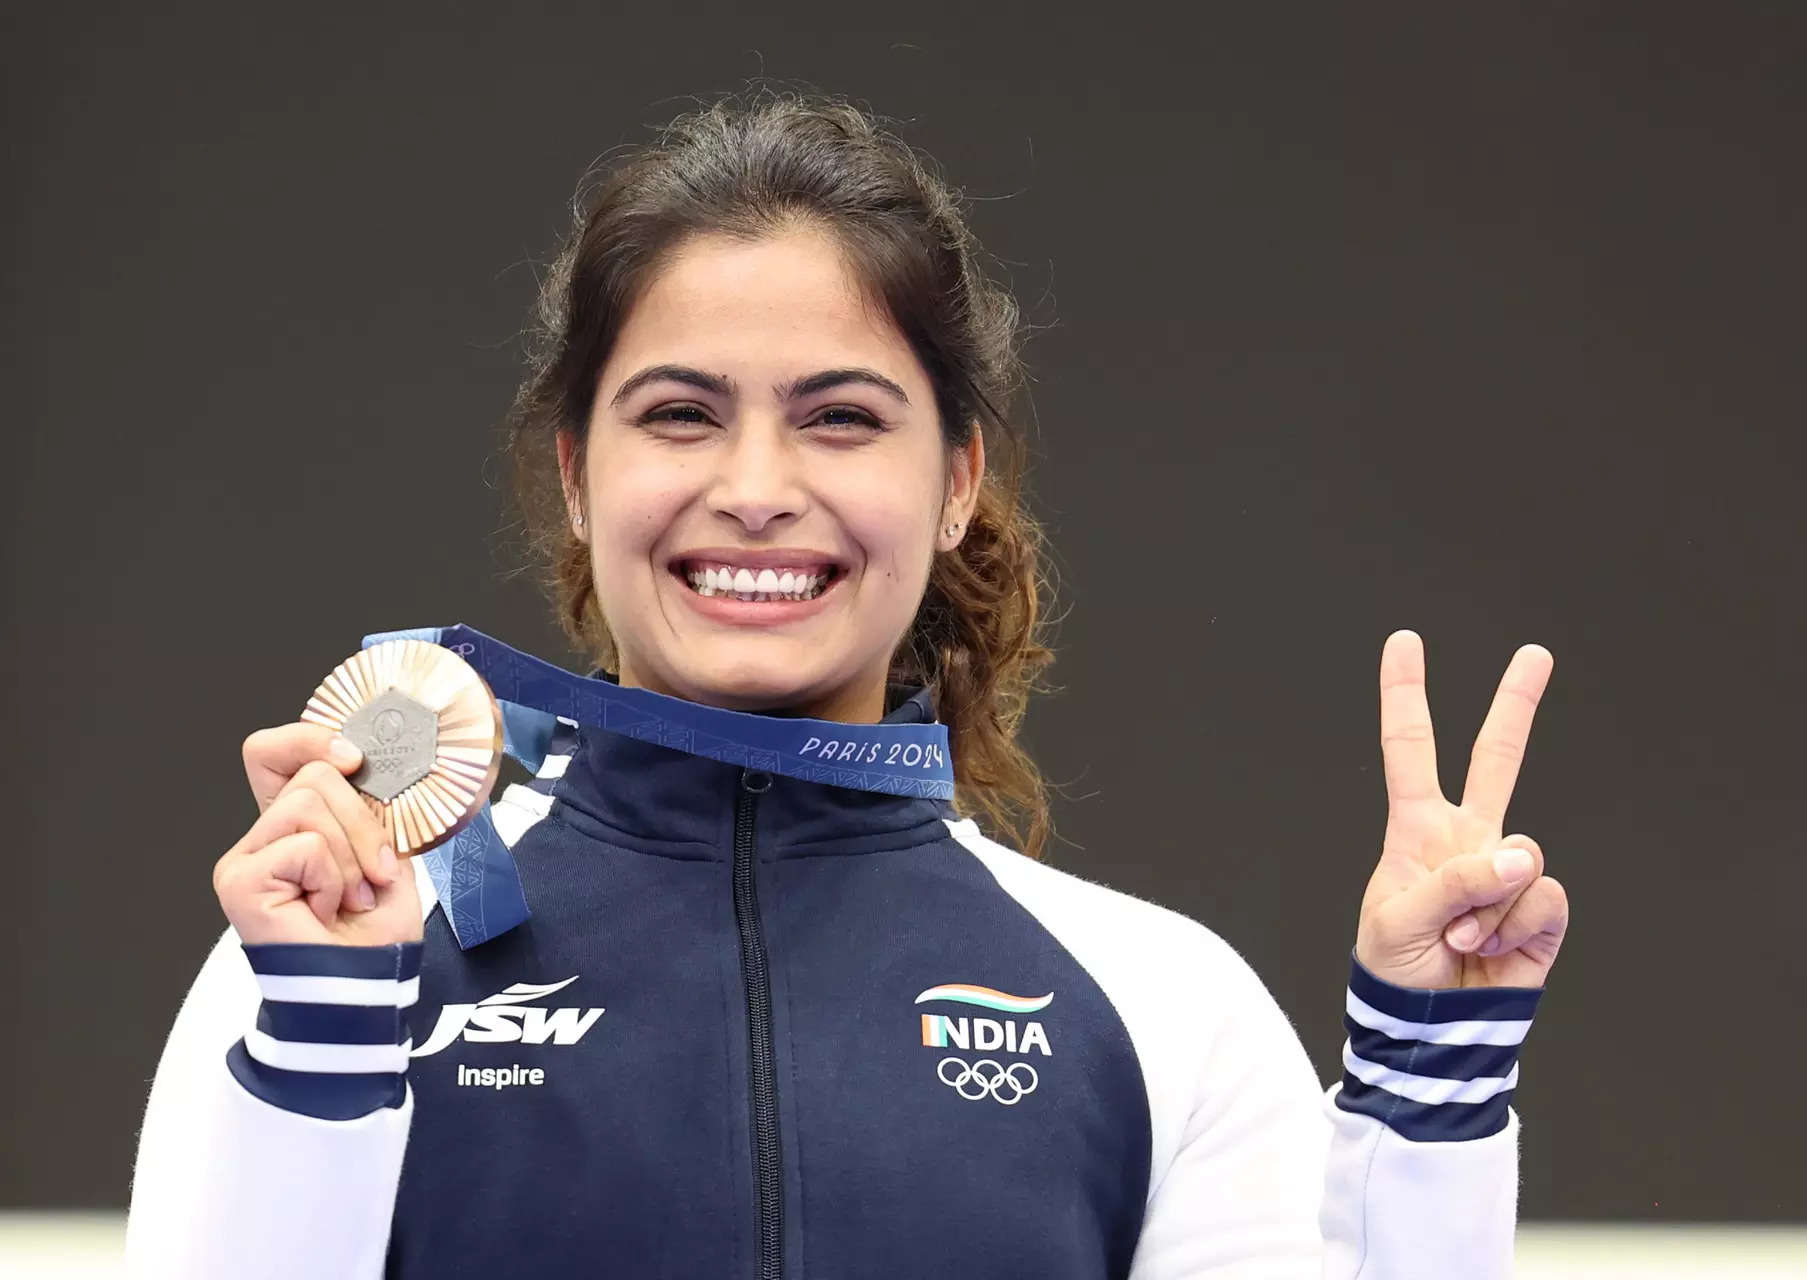 Paris Olympics to poster girl: Manu Bhaker bombarded with endorsement opportunities worth crores 